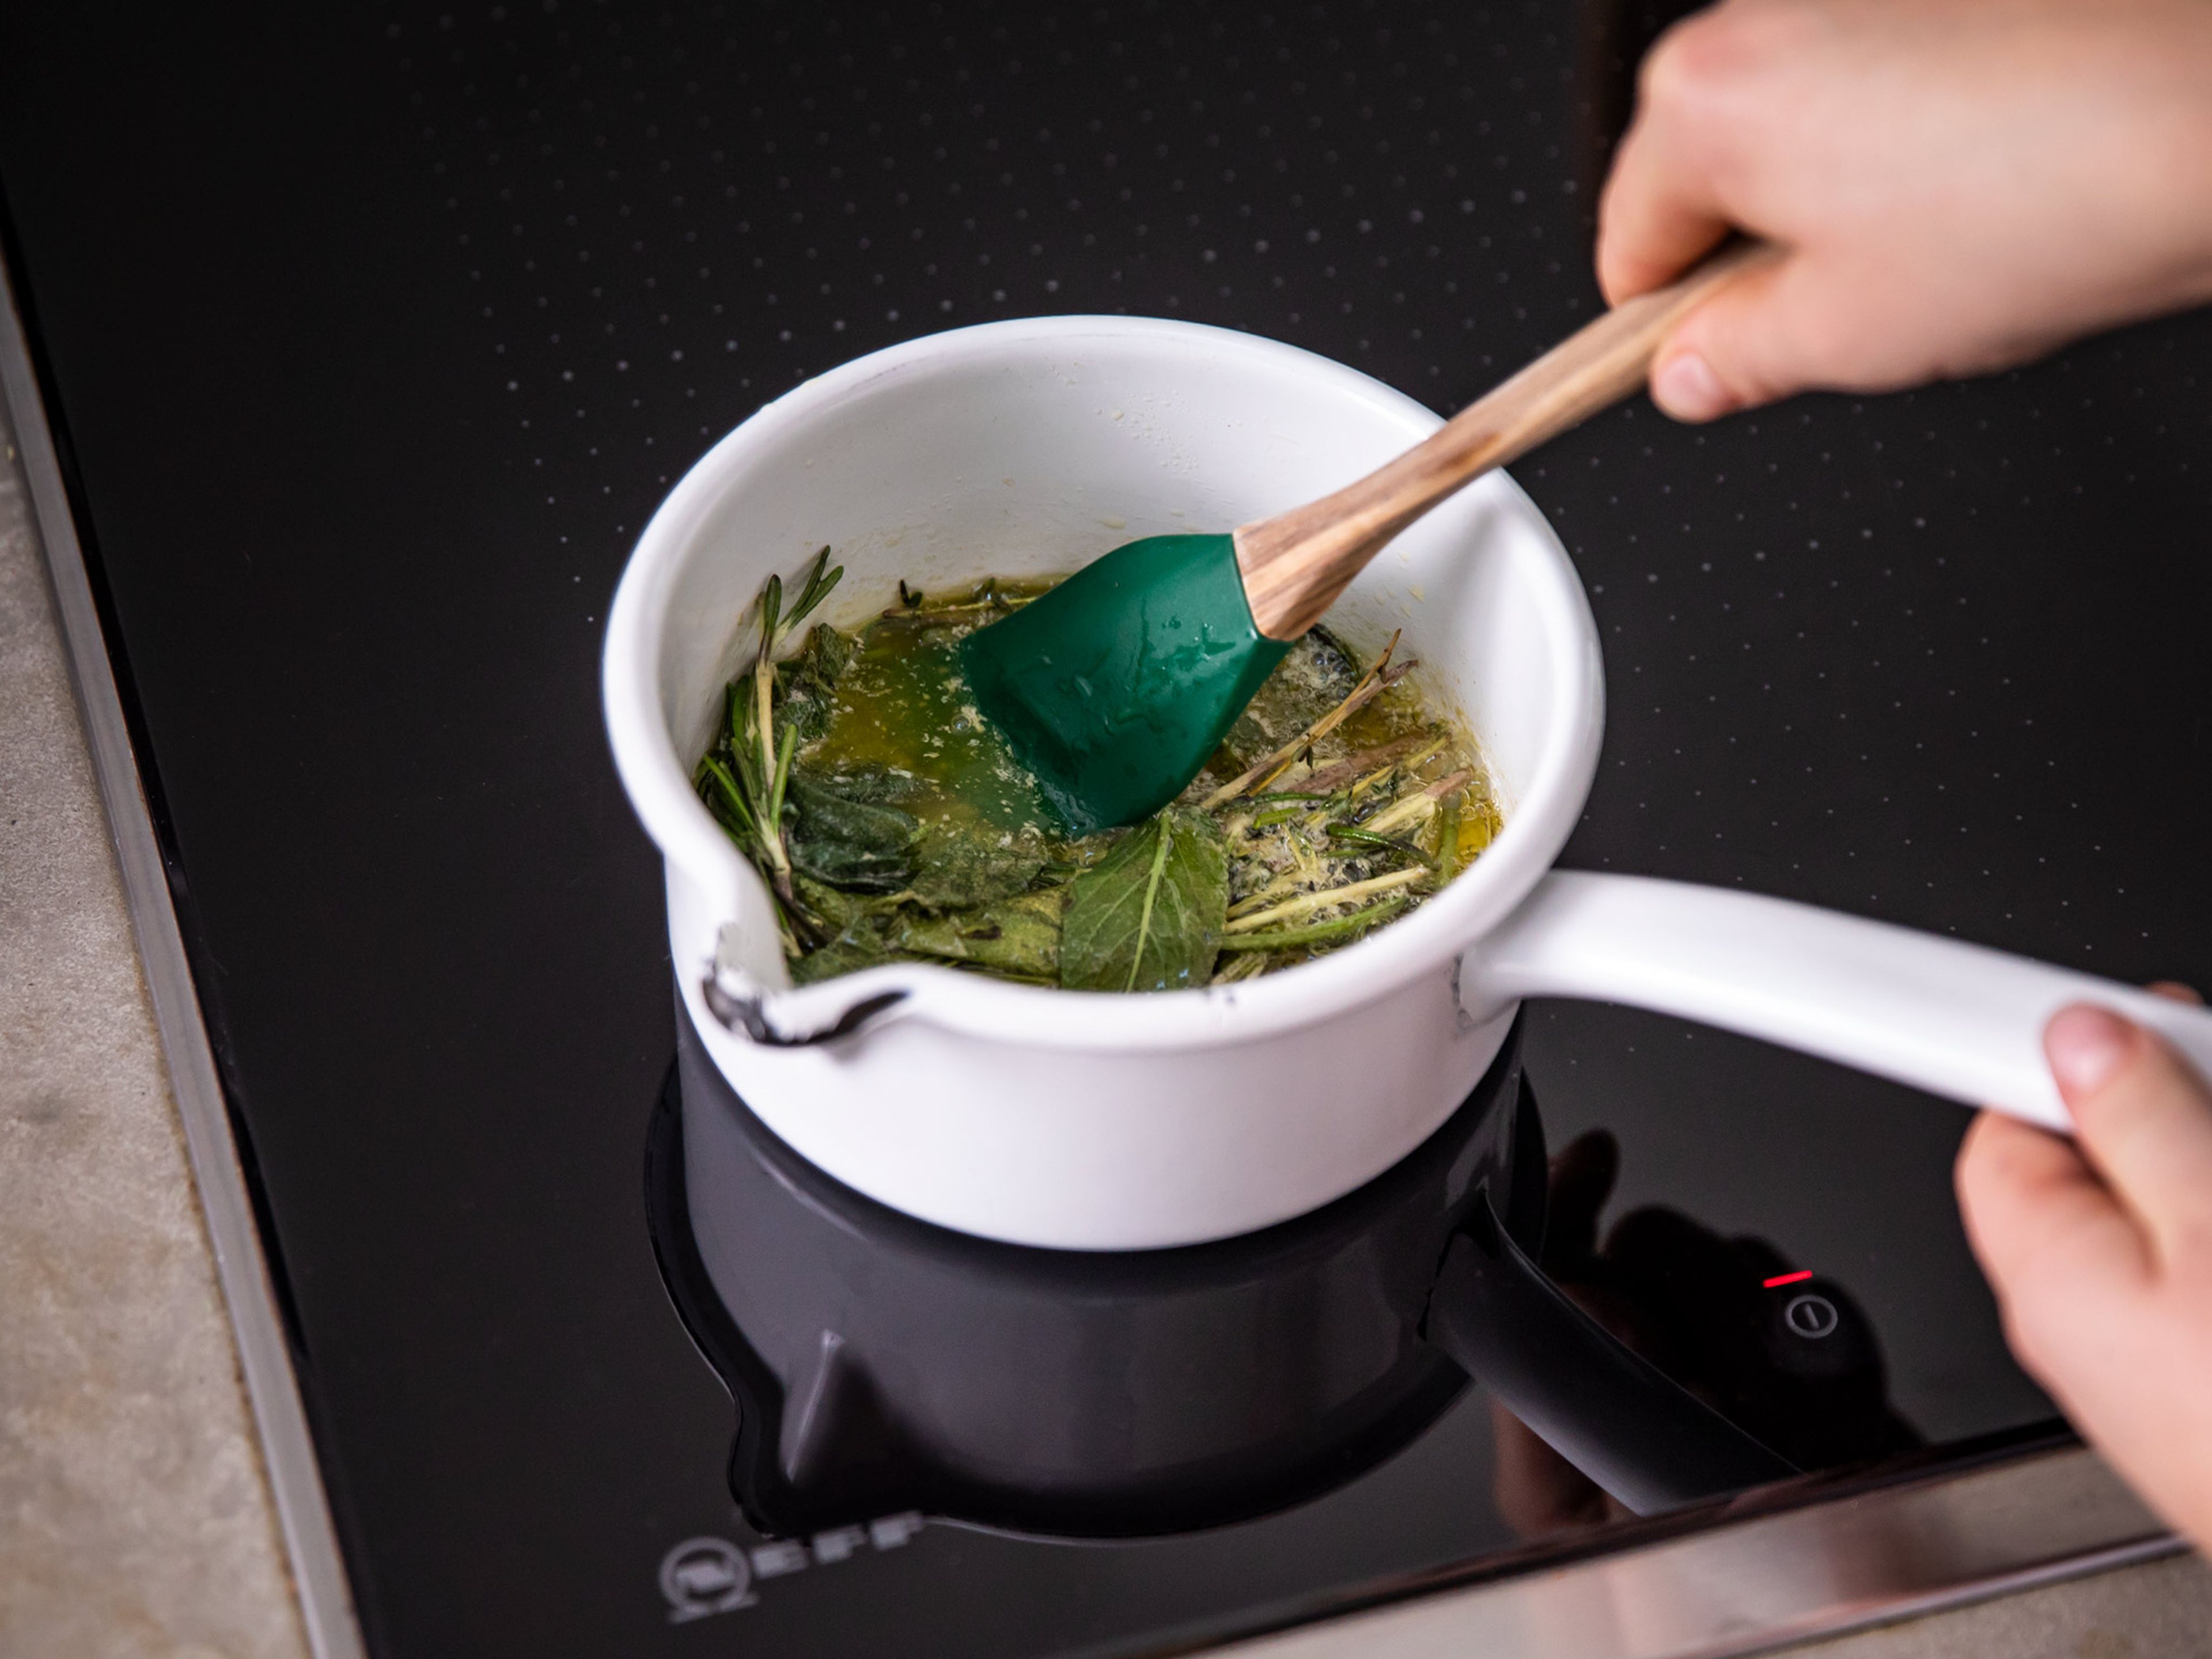 In the meantime, make herb butter by melting butter in a saucepan over low heat. Add remaining rosemary, thyme, and sage, stir and let bubble gently for approx. 2 min. Remove from heat and set aside. Approx. 10 min before the end of the cooking time, baste chicken with melted herb butter.